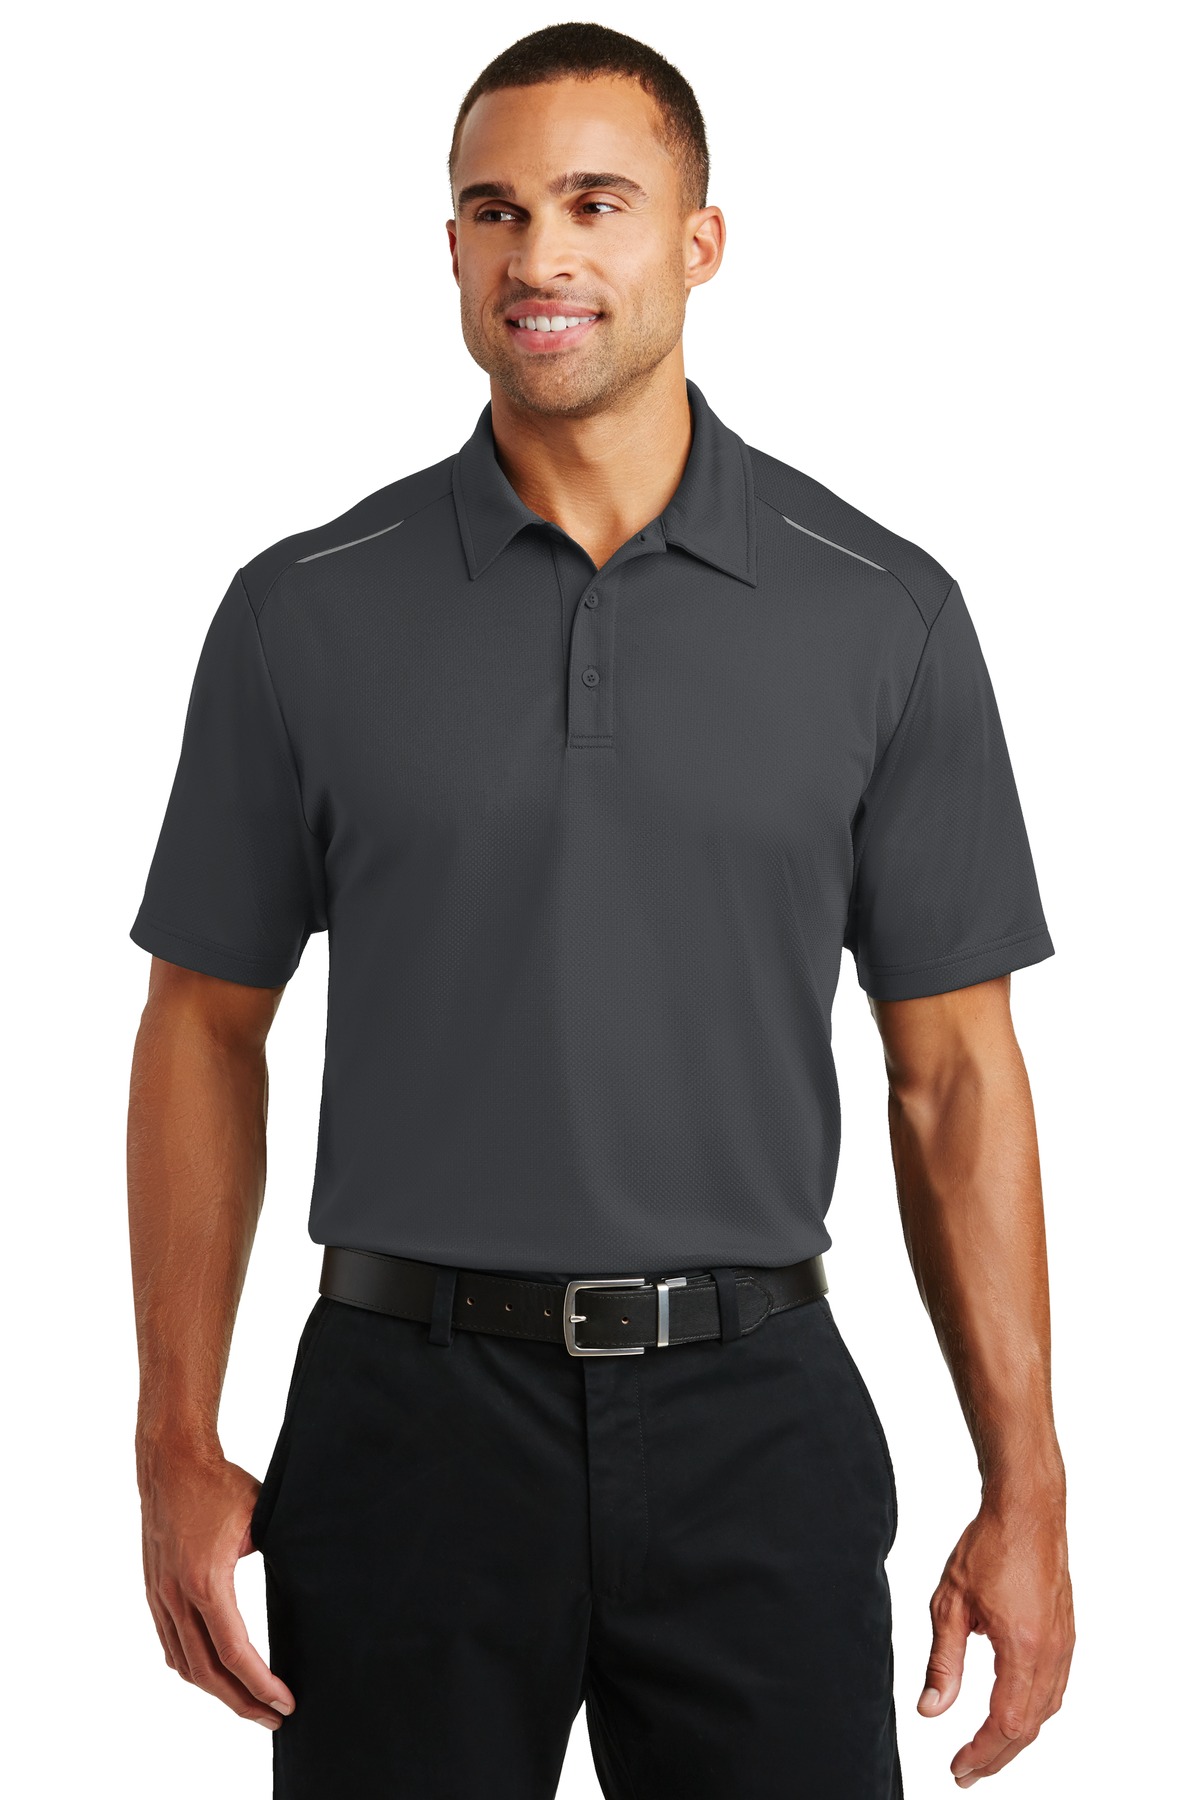 Buy Men's Pinpoint Mesh Polo with Reflective Accent - Port Authority ...